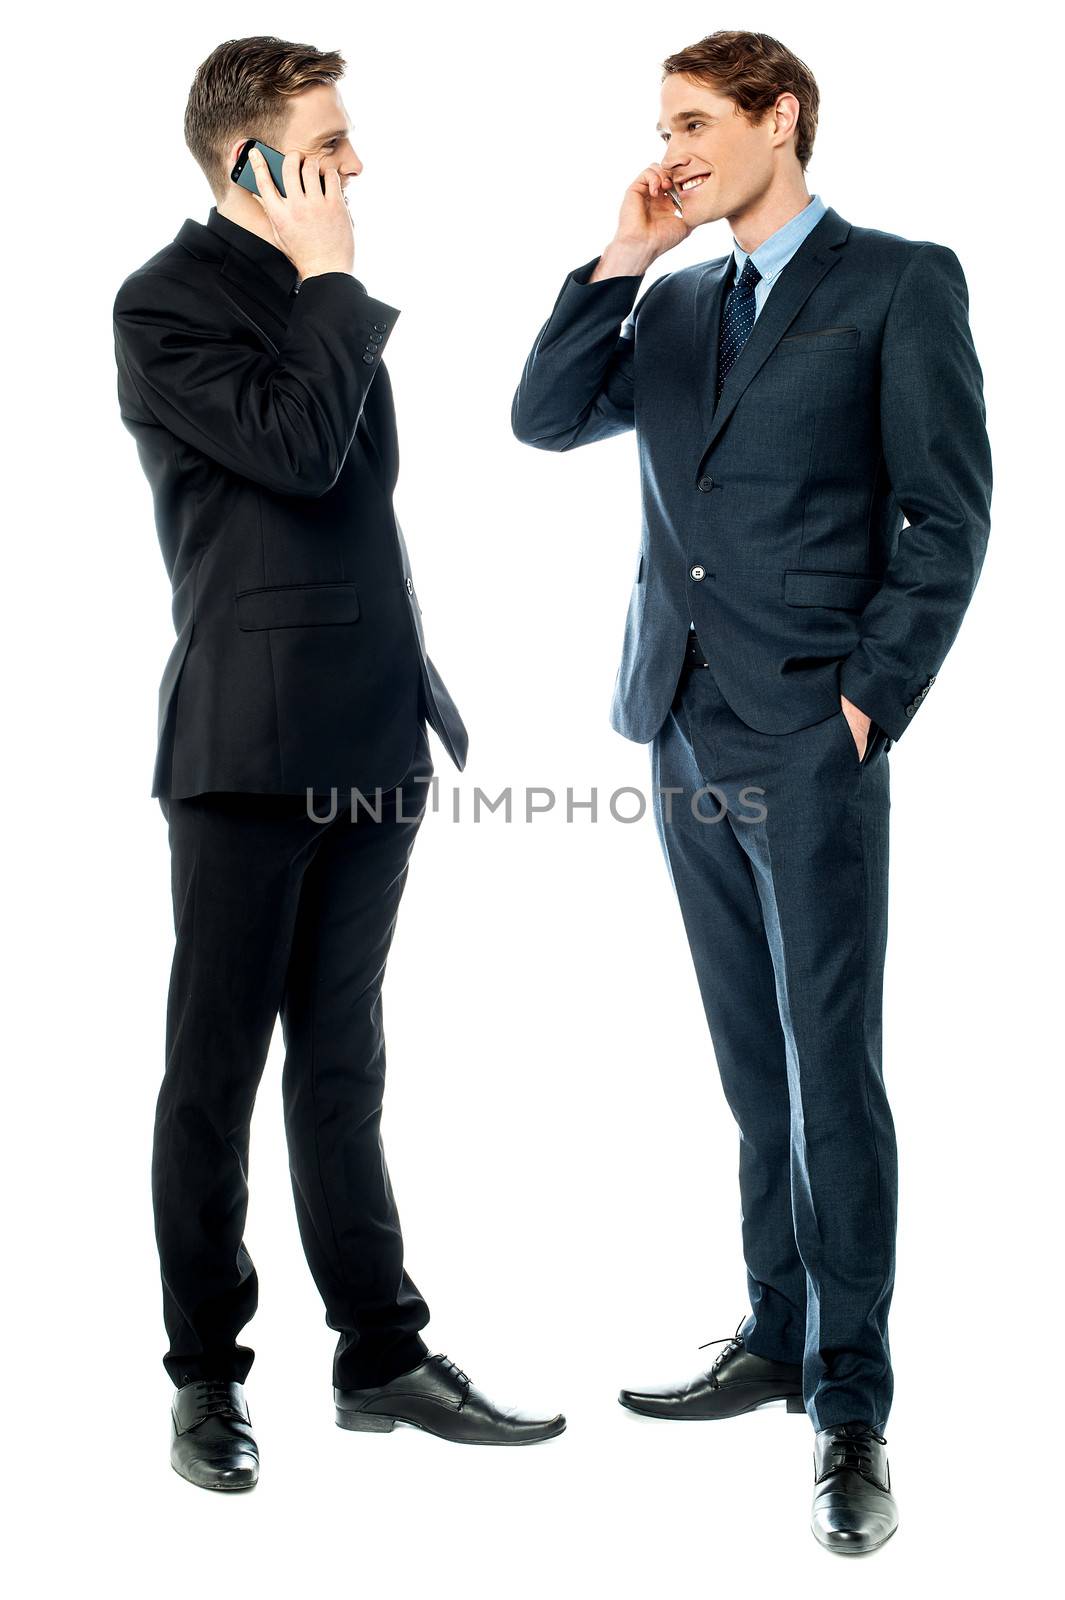 Business people communicating via cellphone